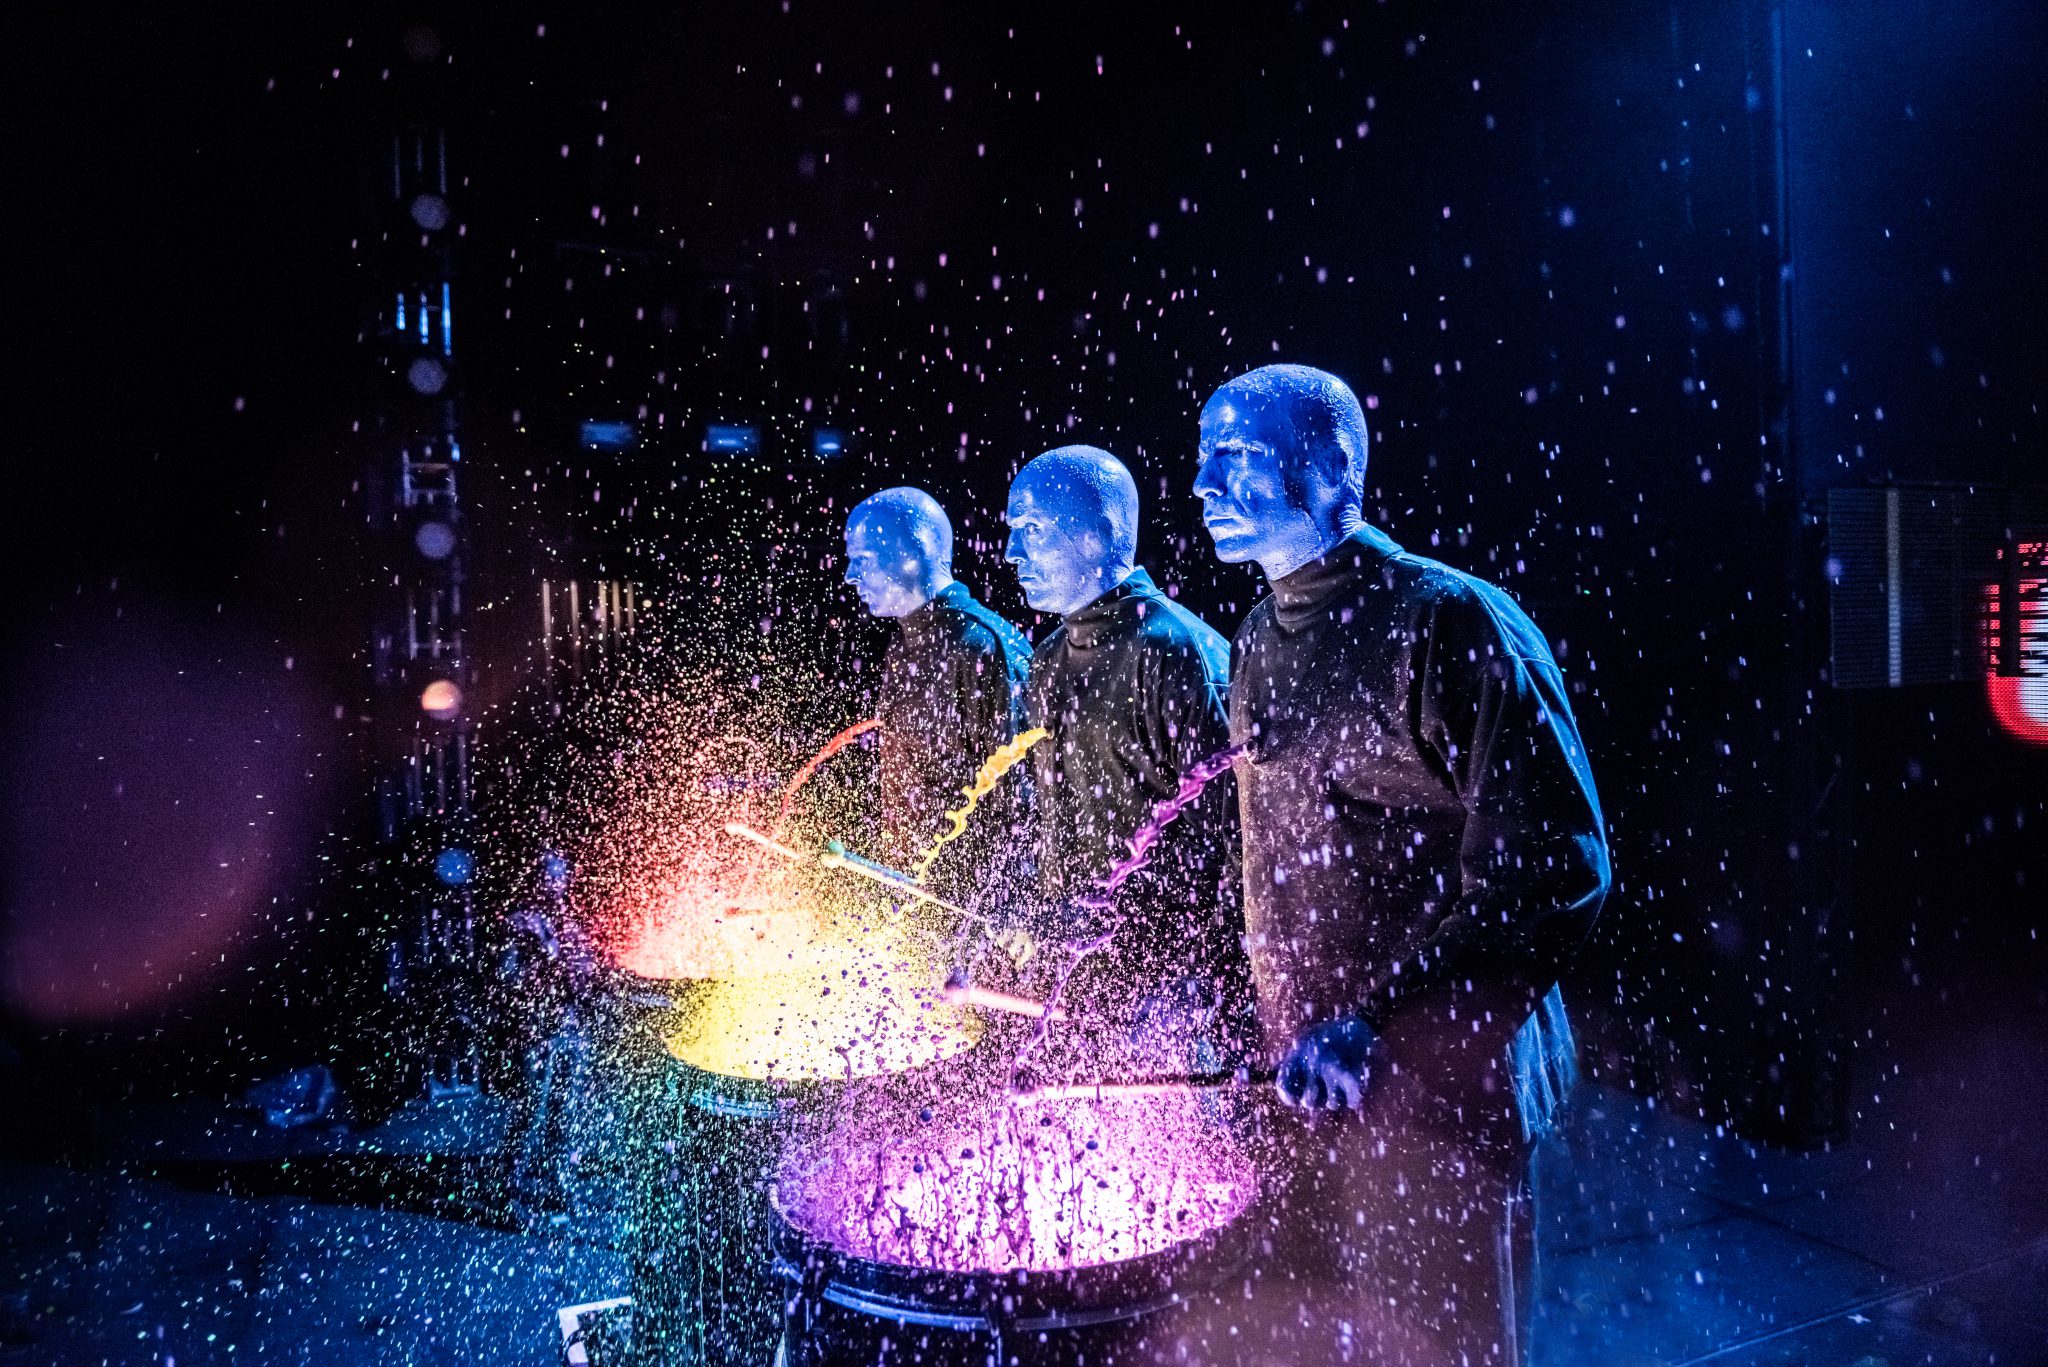 Blue Man Group Review A HighEnergy Show with Surreal, NonStop Humor